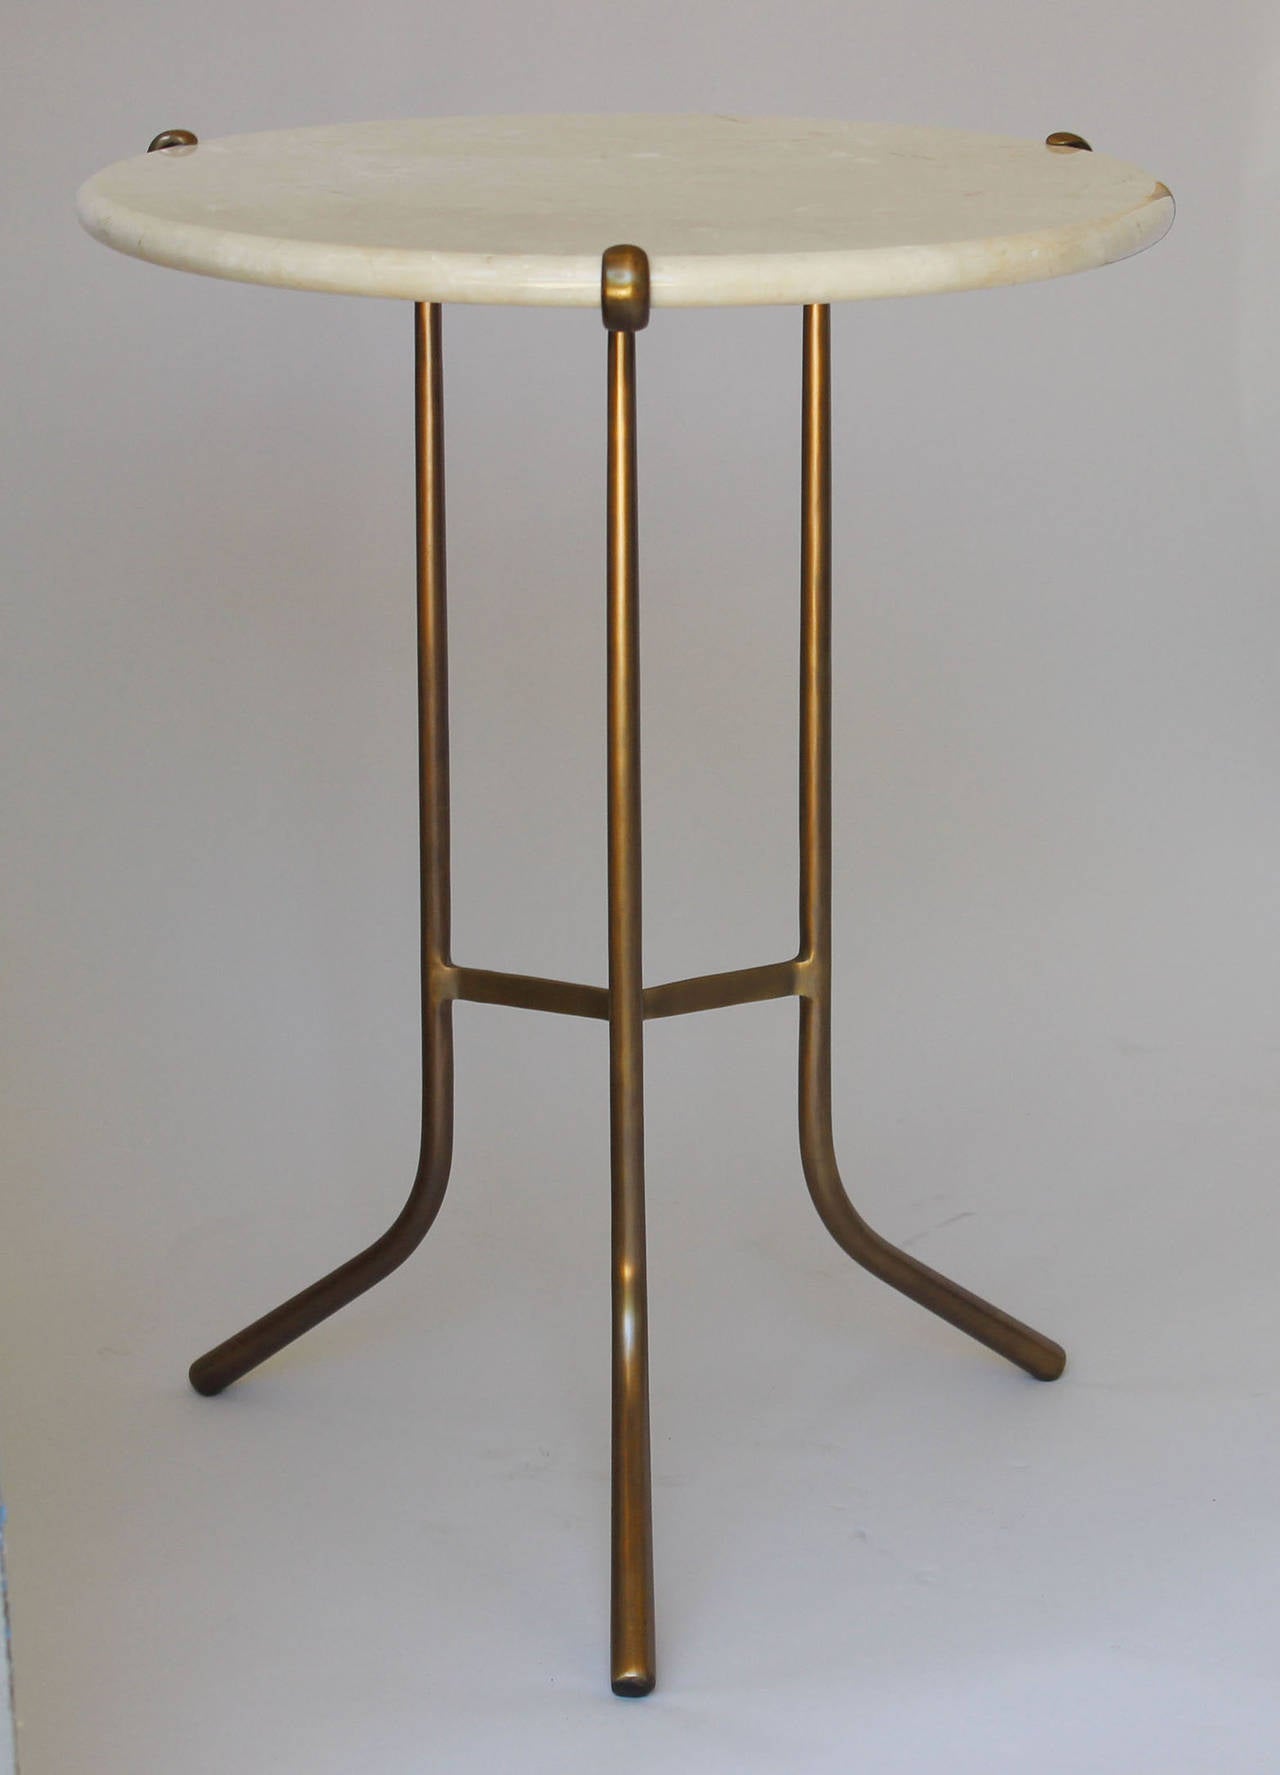 A Cedric Hartman style bronzetone metal base side table with travertine top.

complementary delivery within 30 miles.